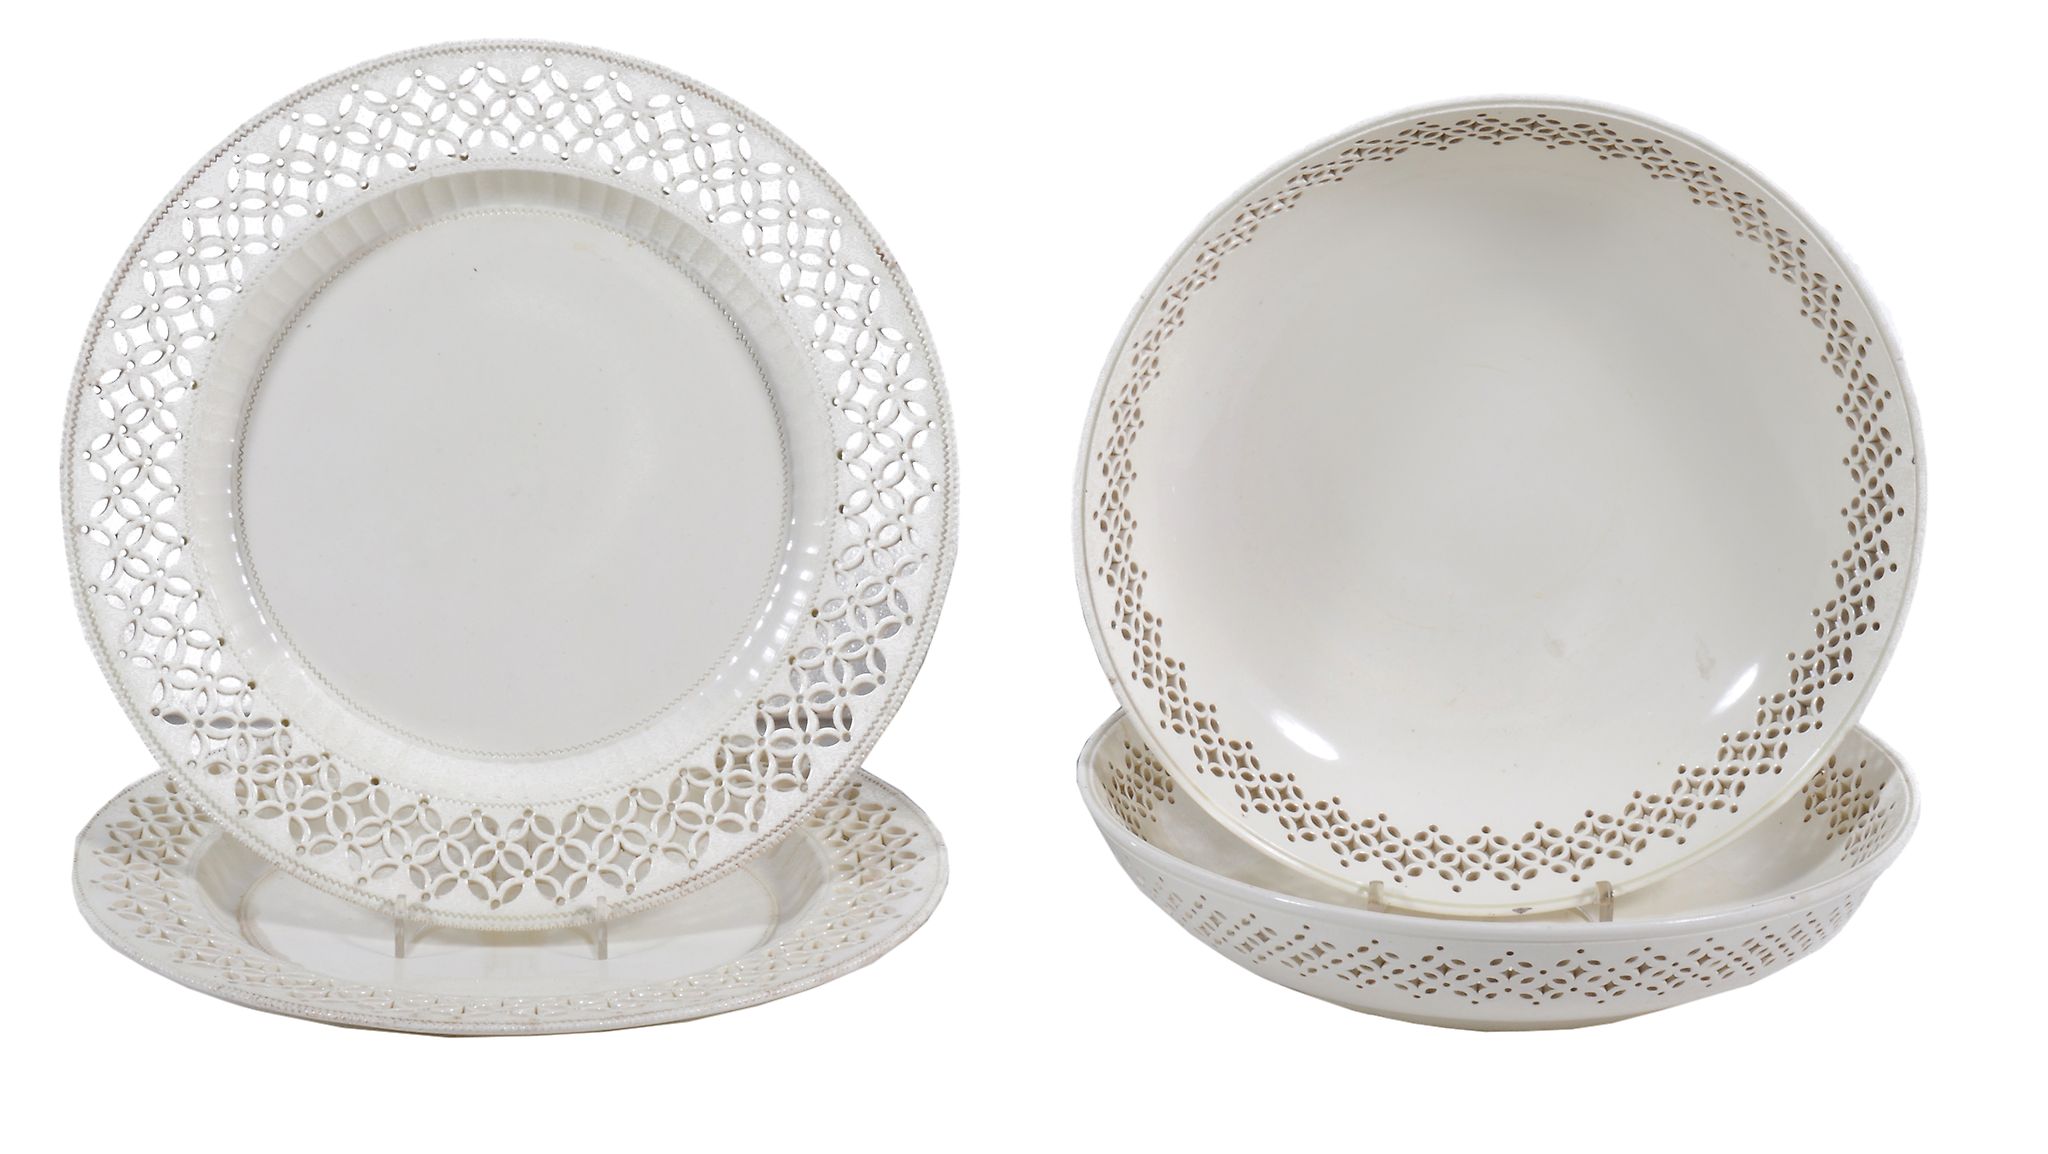 A pair of English creamware shallow bowls and associated plates,   circa 1775-85,  with pierced